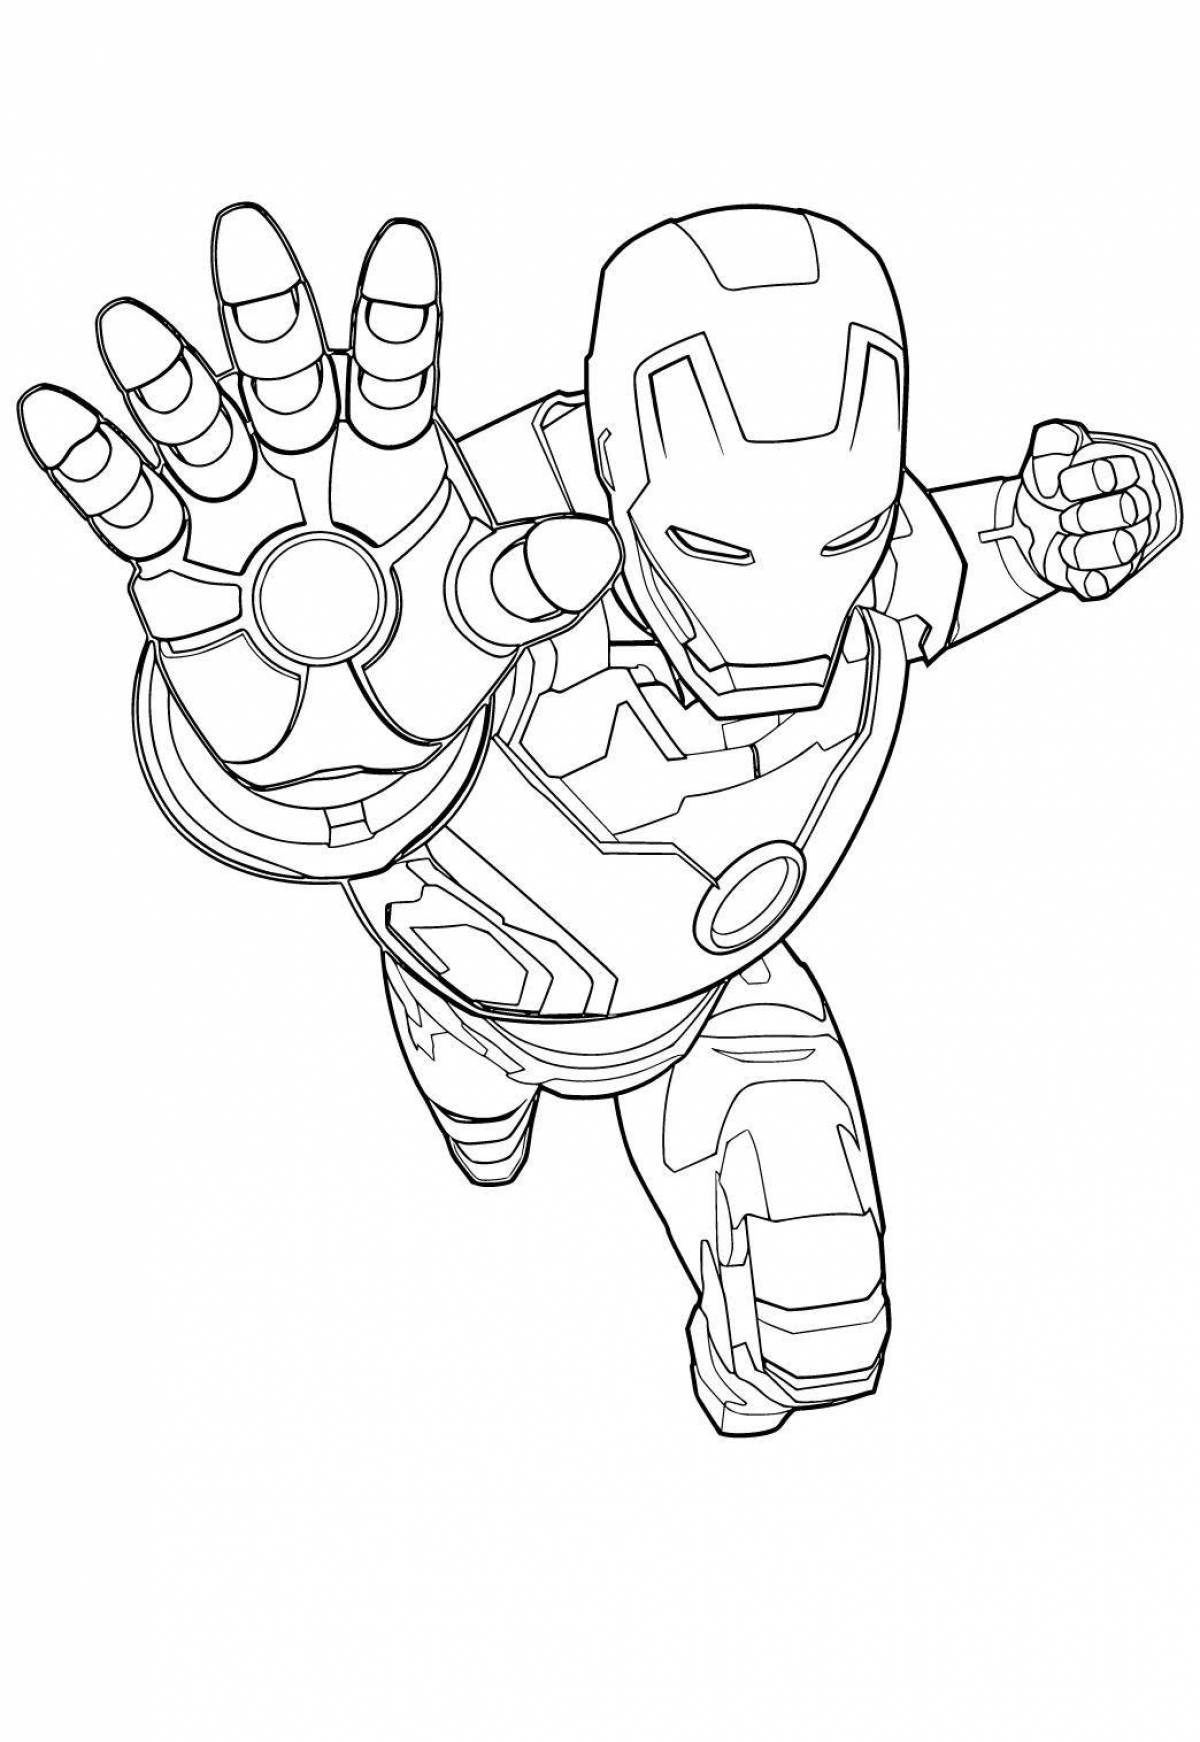 Colorfully crafted iron patriot coloring page